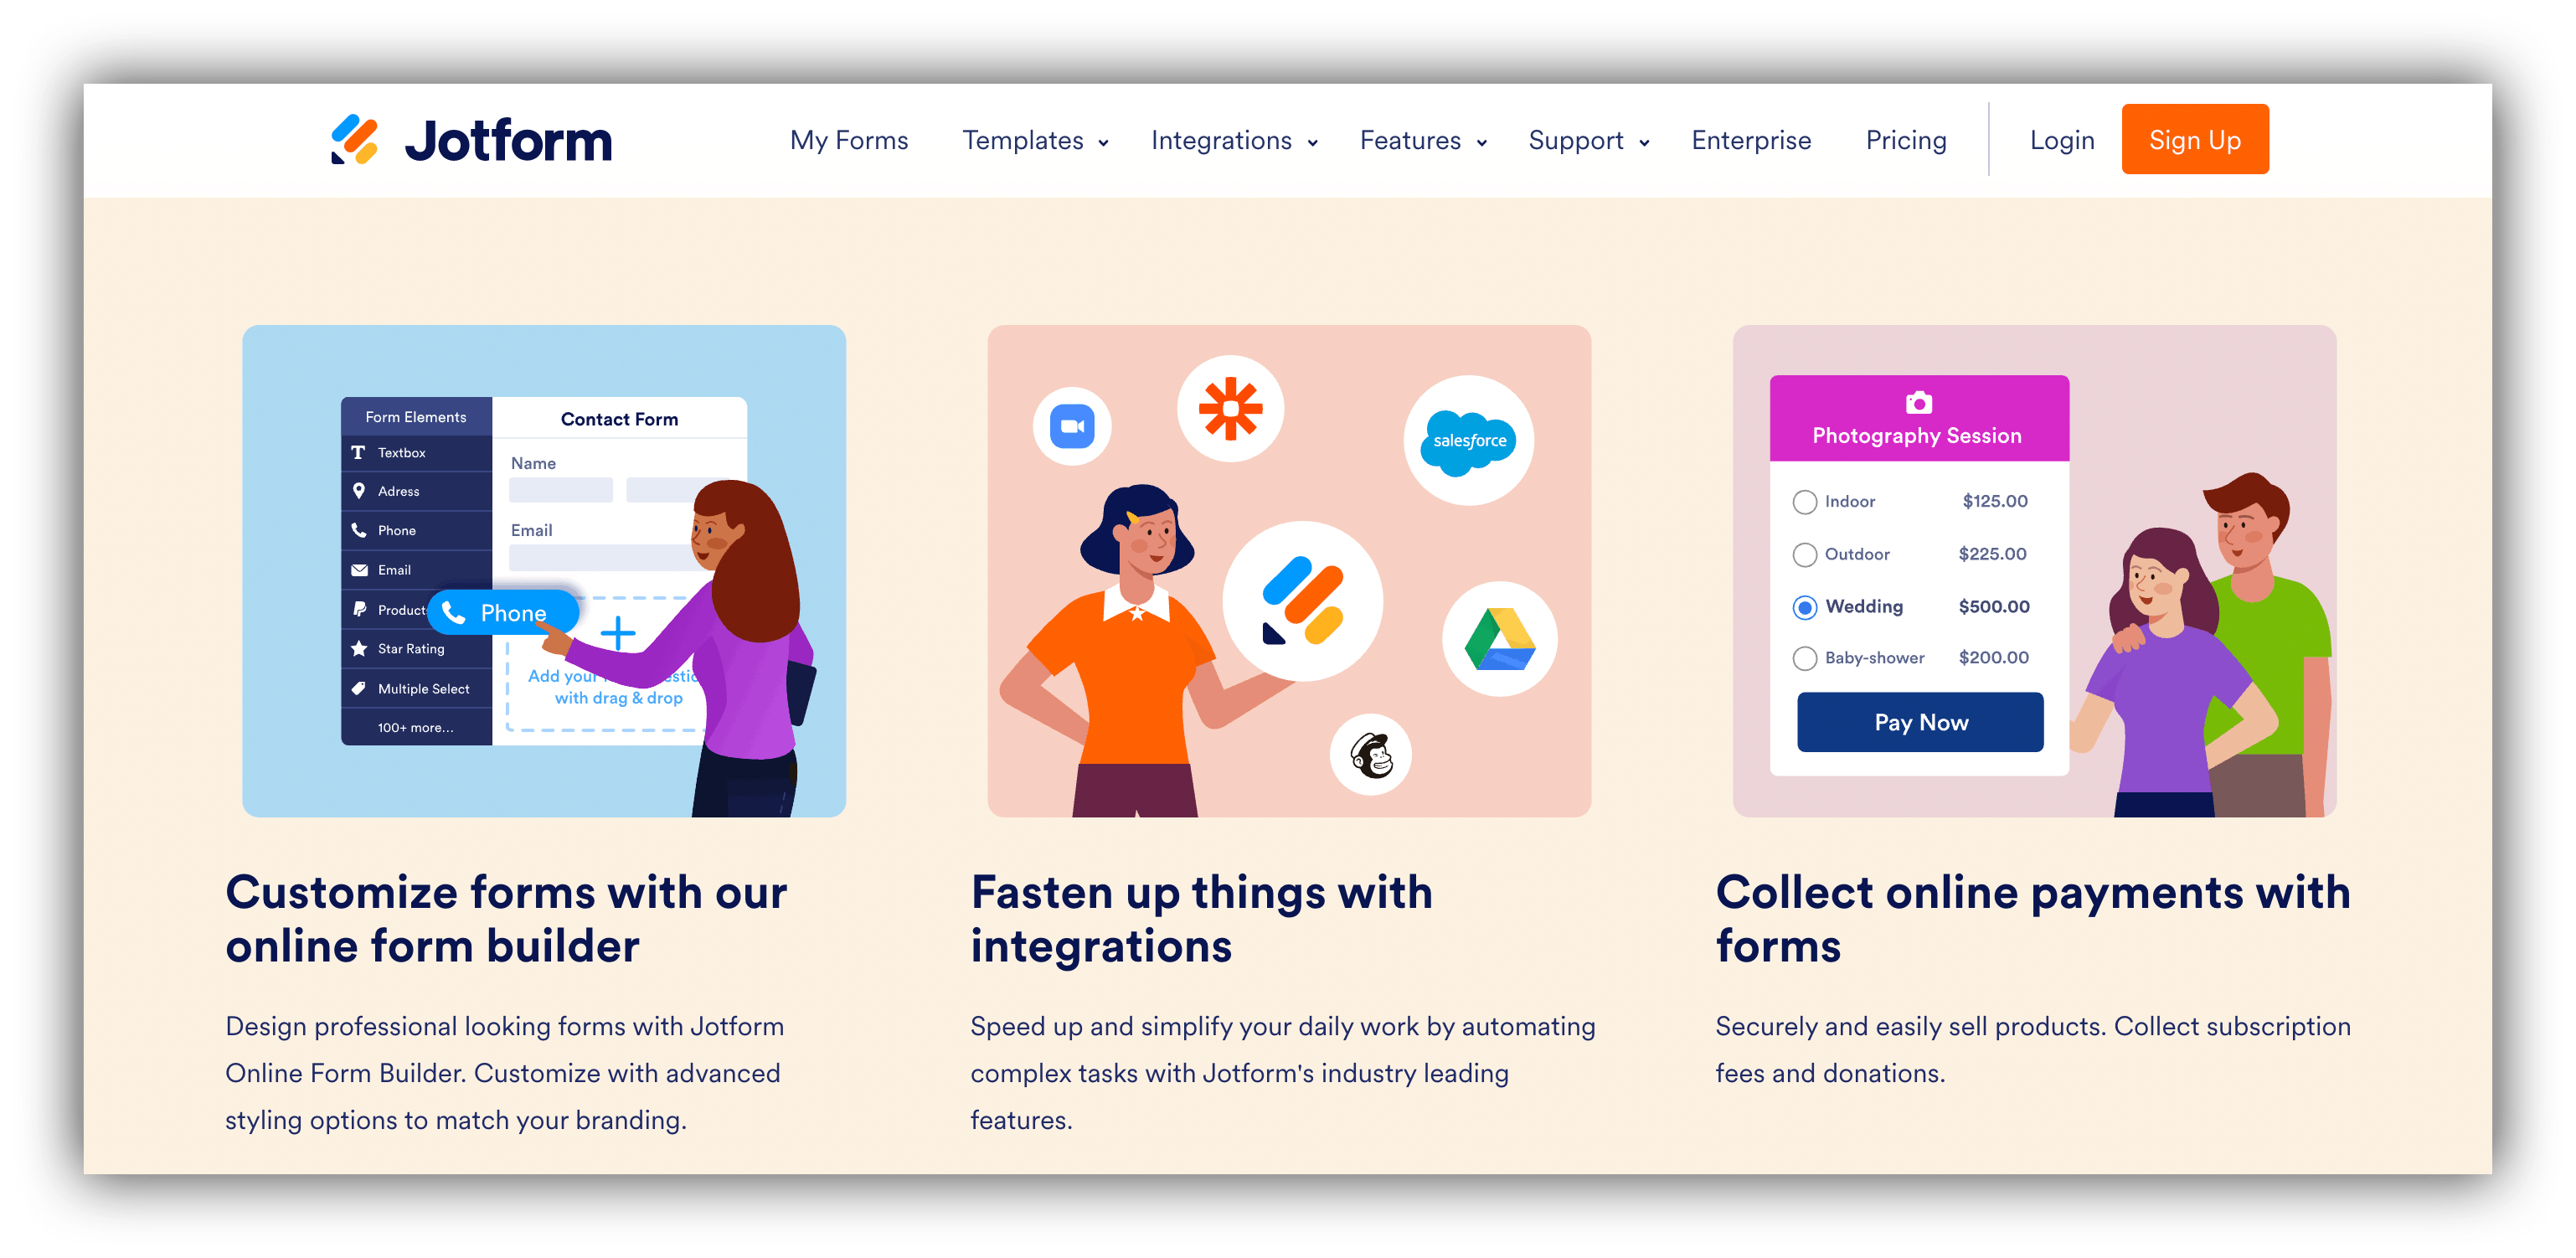 Airtable from alternative Jotform landing page